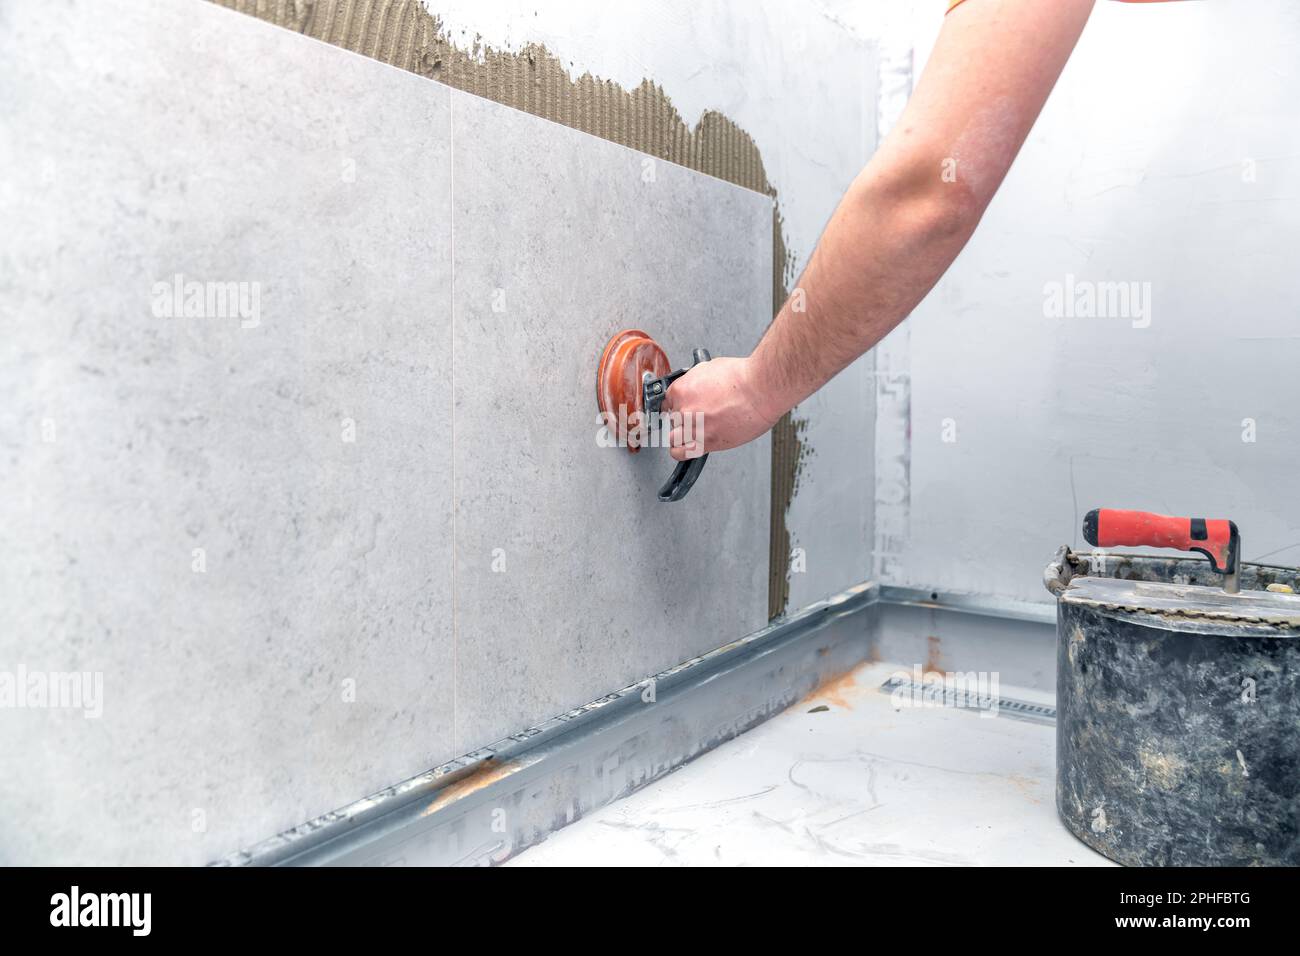 craftsman tiling the room with large format tiling Stock Photo